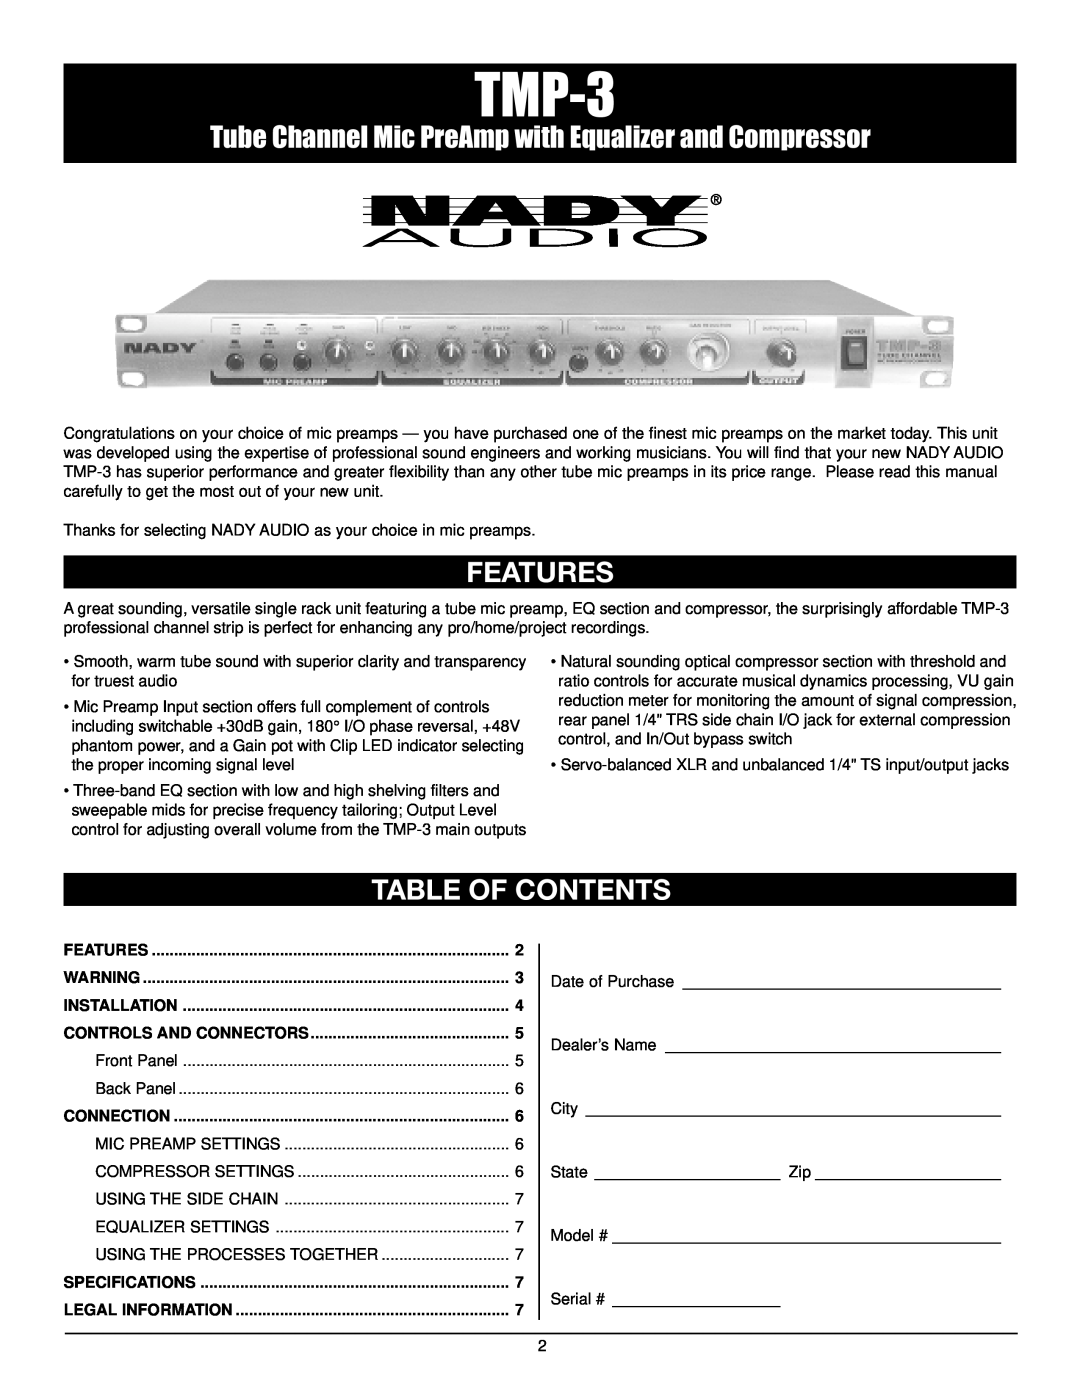 Nady Systems TMP-3 owner manual Features, Table Of Contents 